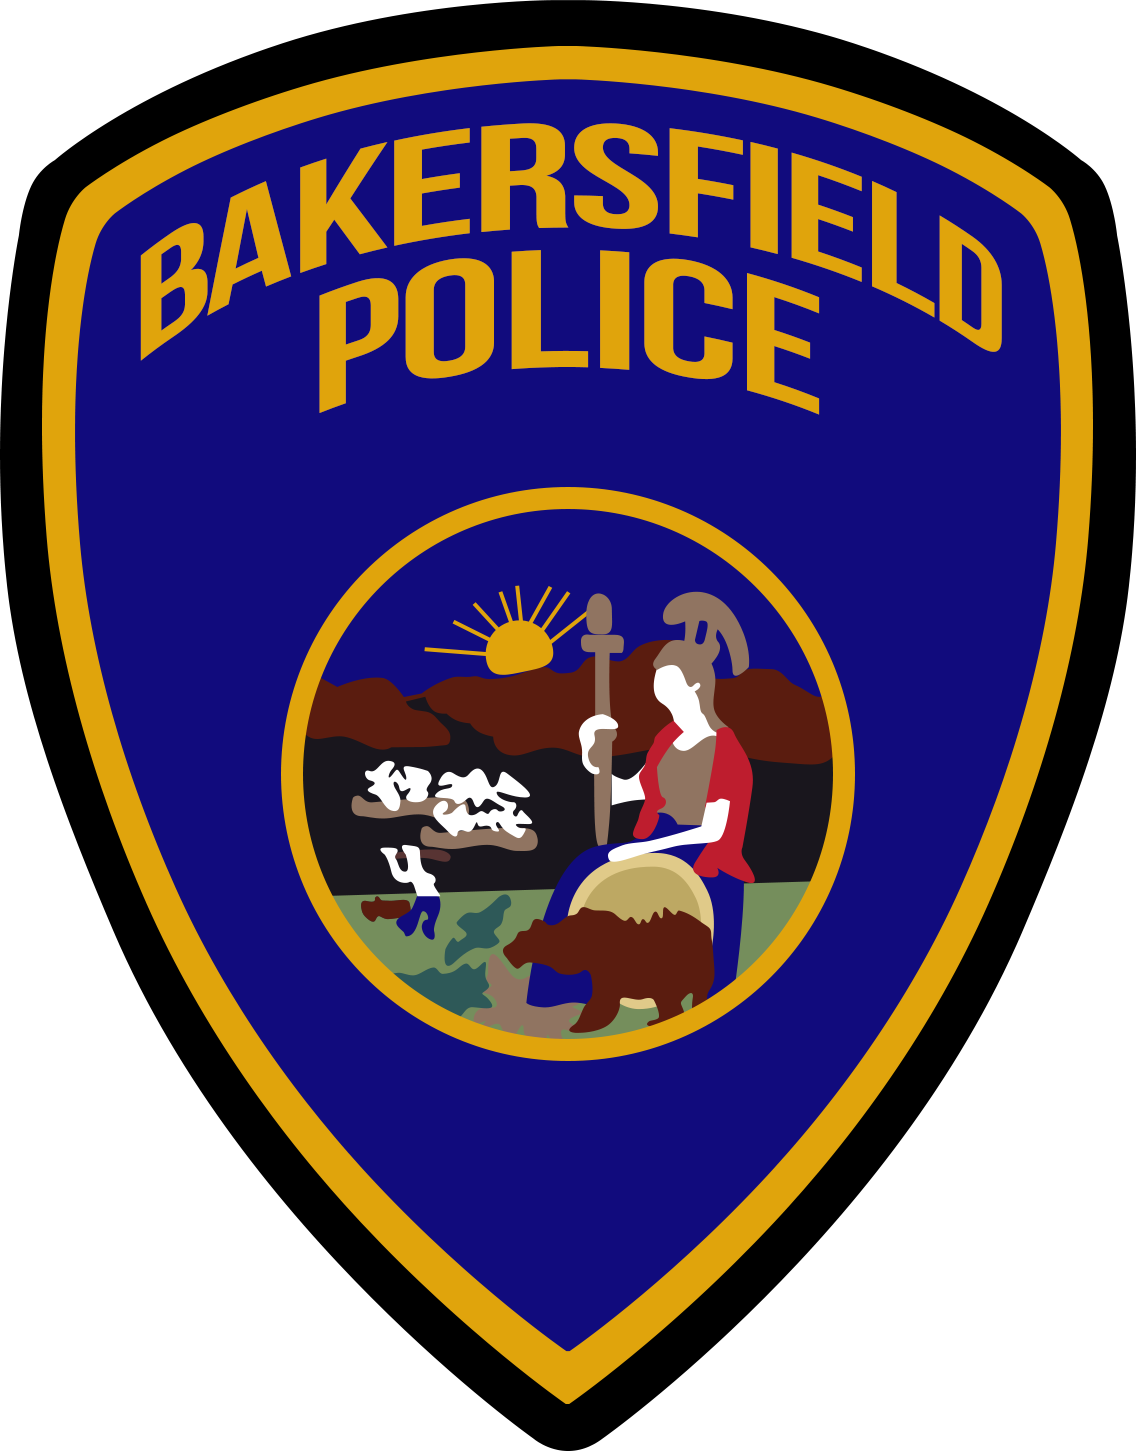 Bakersfield Police Department Implements Category Leading Software Technology, eSOPH, to Hire Police Recruits Faster Without Compromising Quality